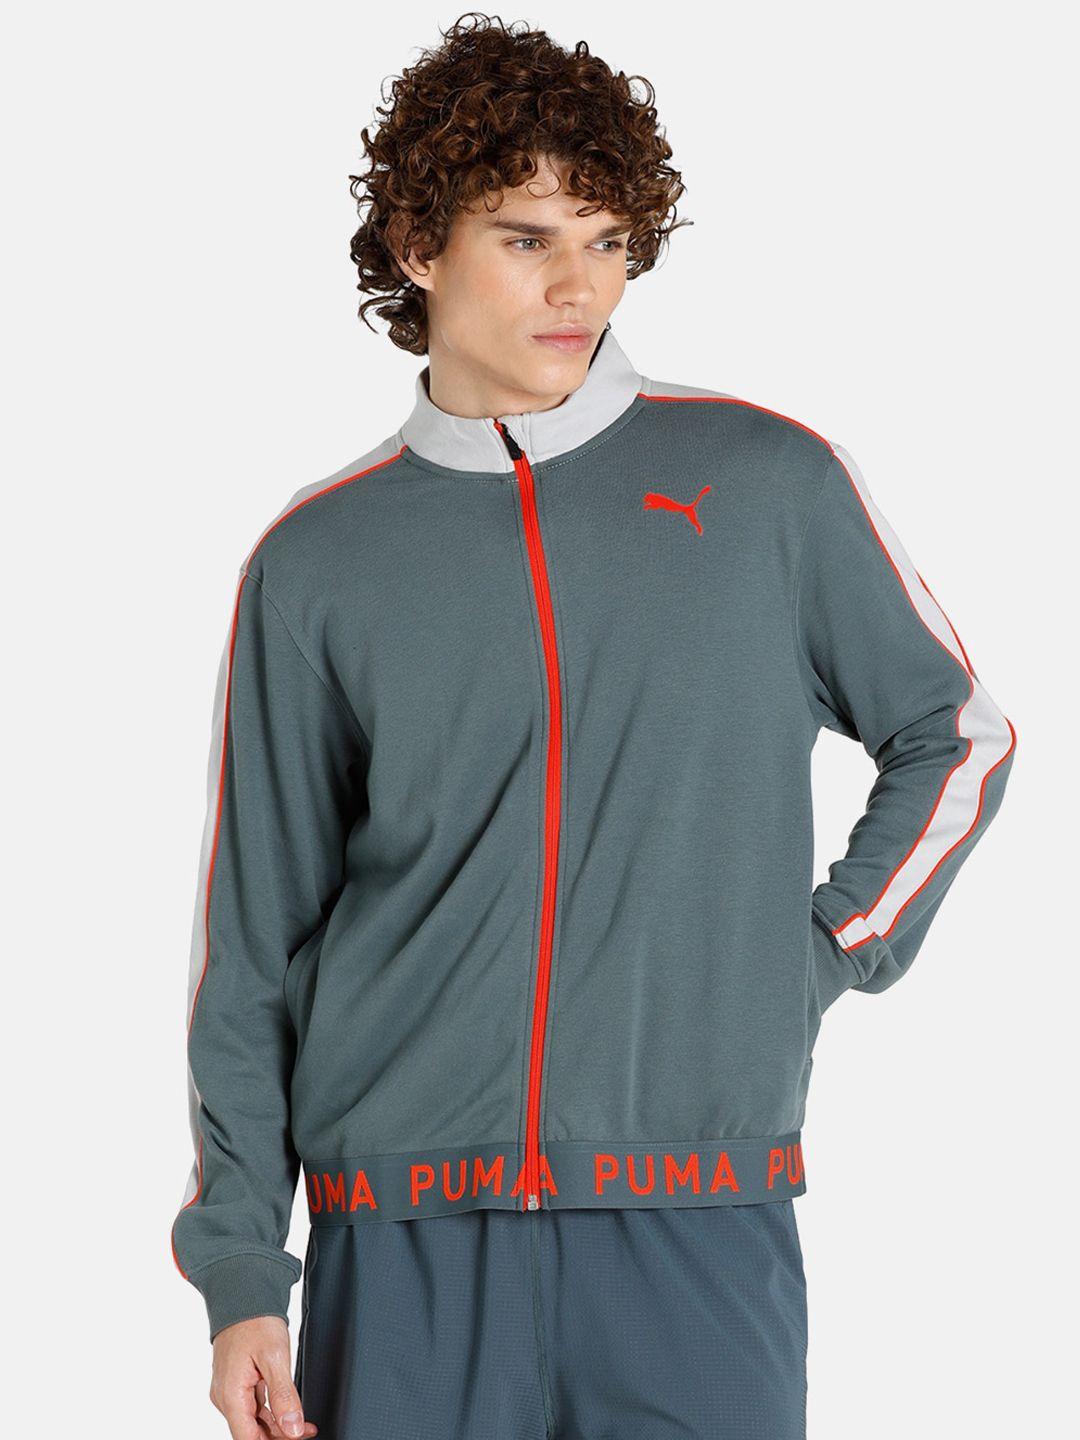 puma men grey & red brand logo printed training or gym sporty track sustainable jacket